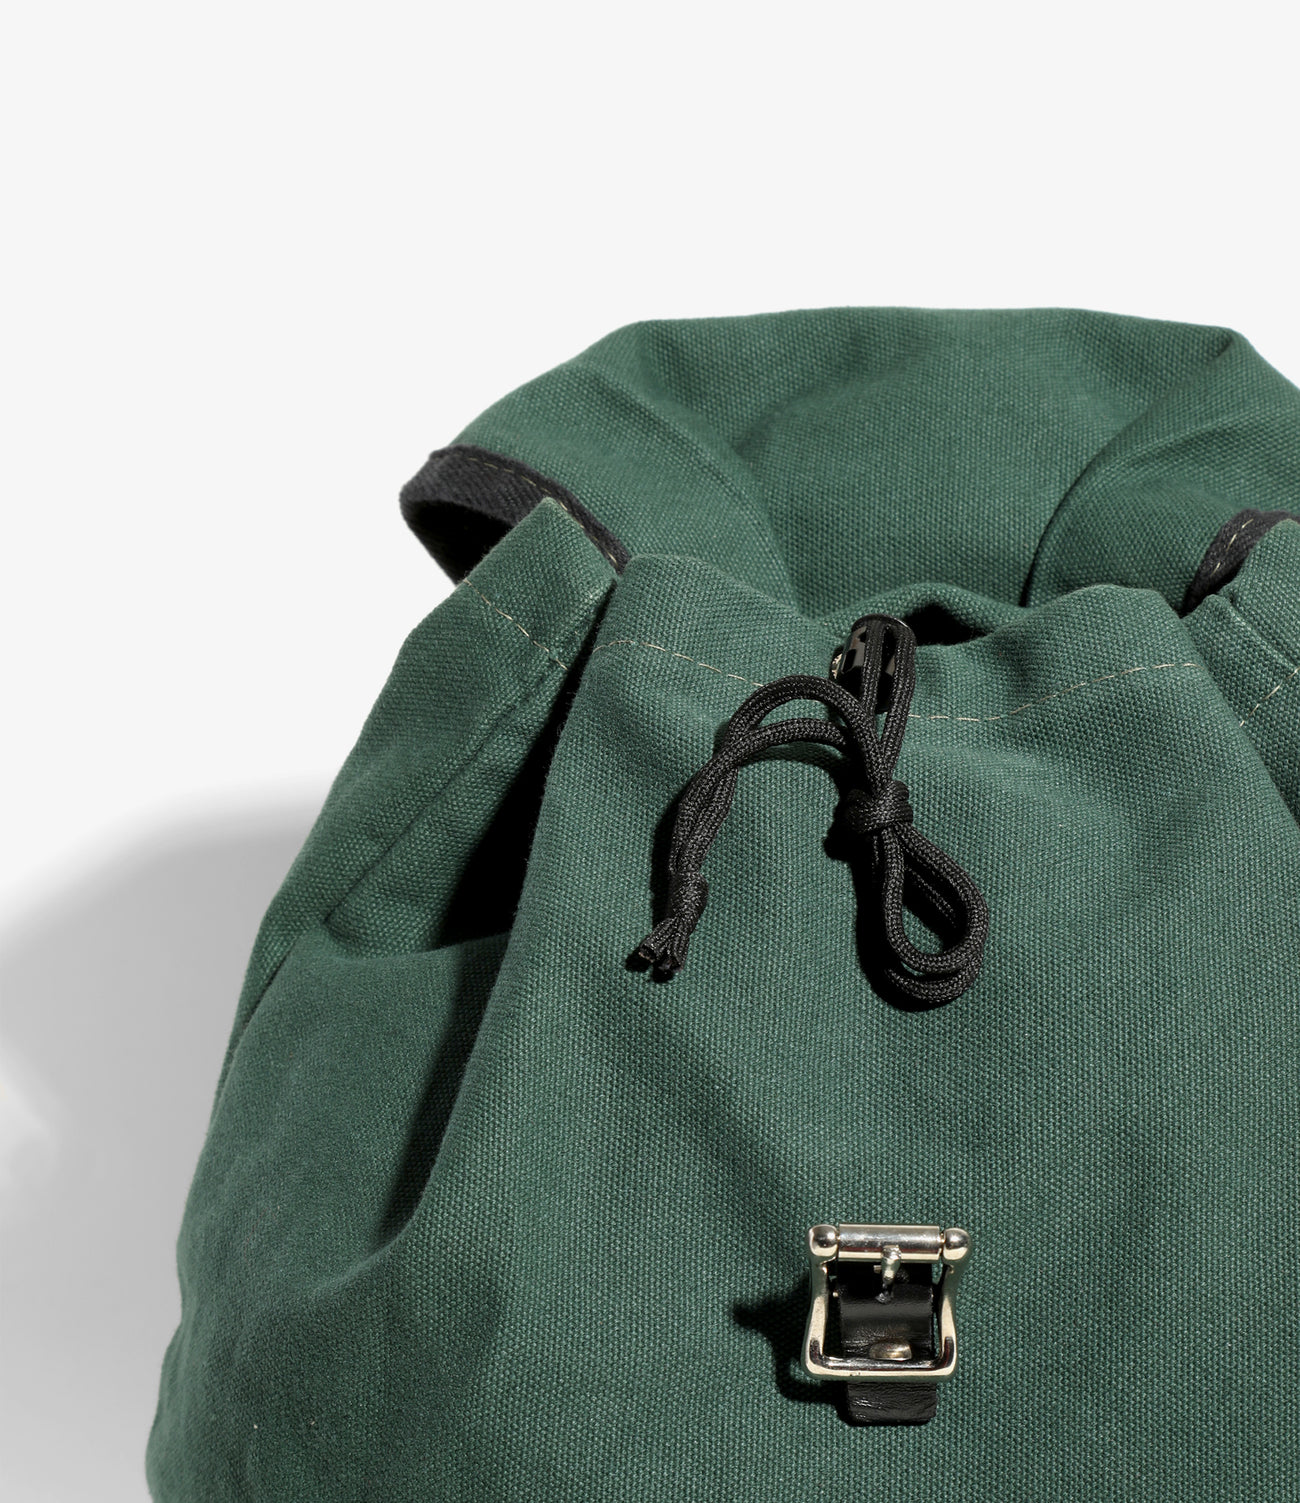 South2 West8 18oz CANVAS DAY PACK